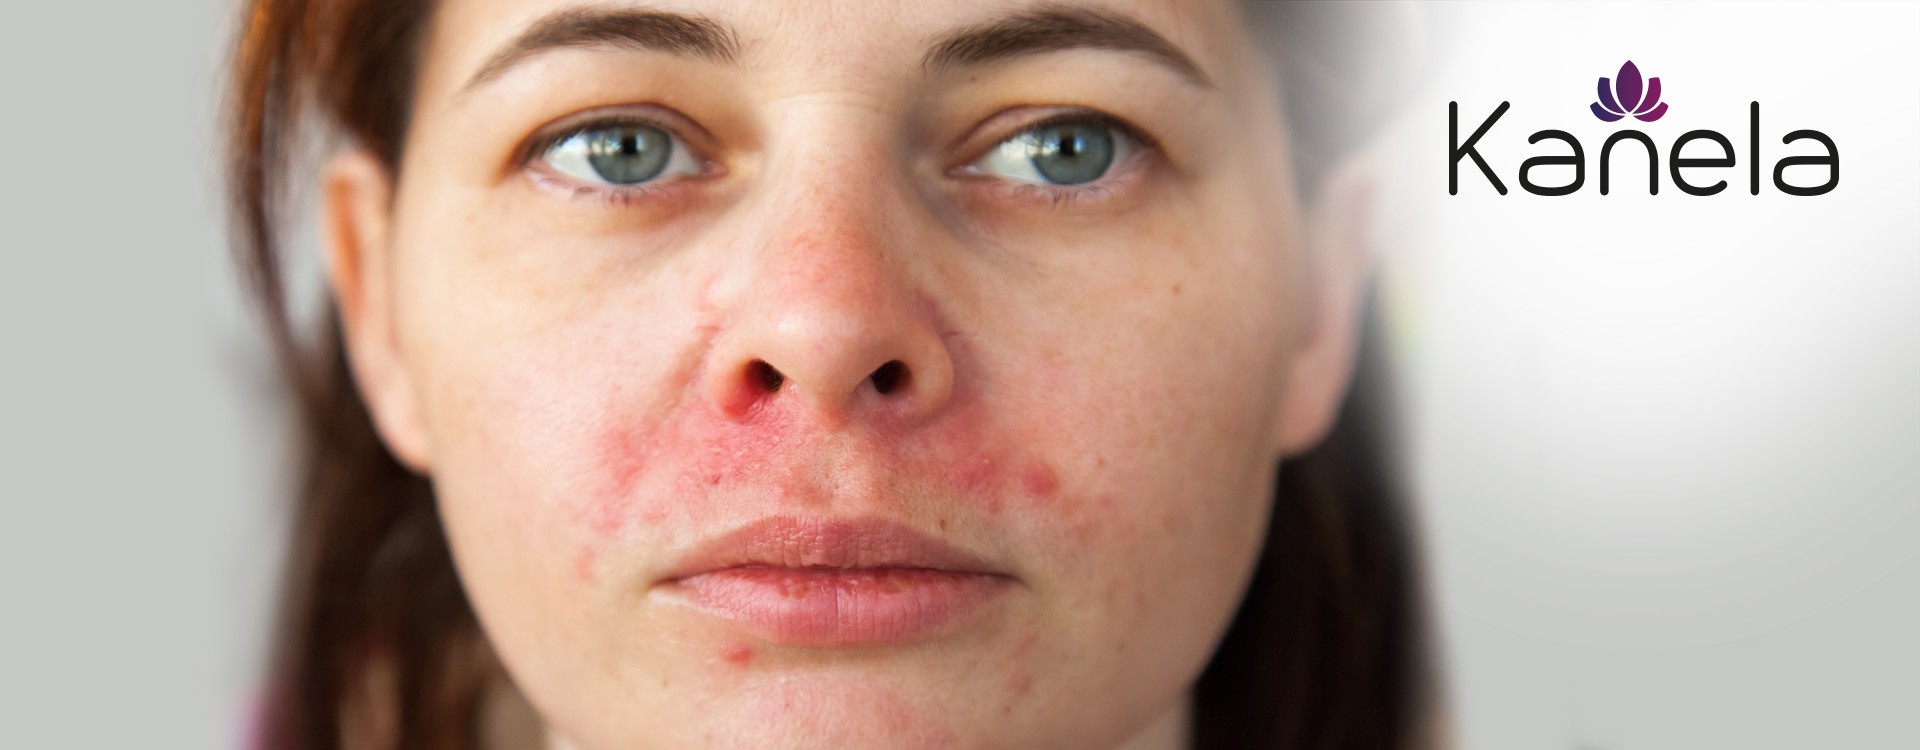 What can be done about perioral dermatitis?